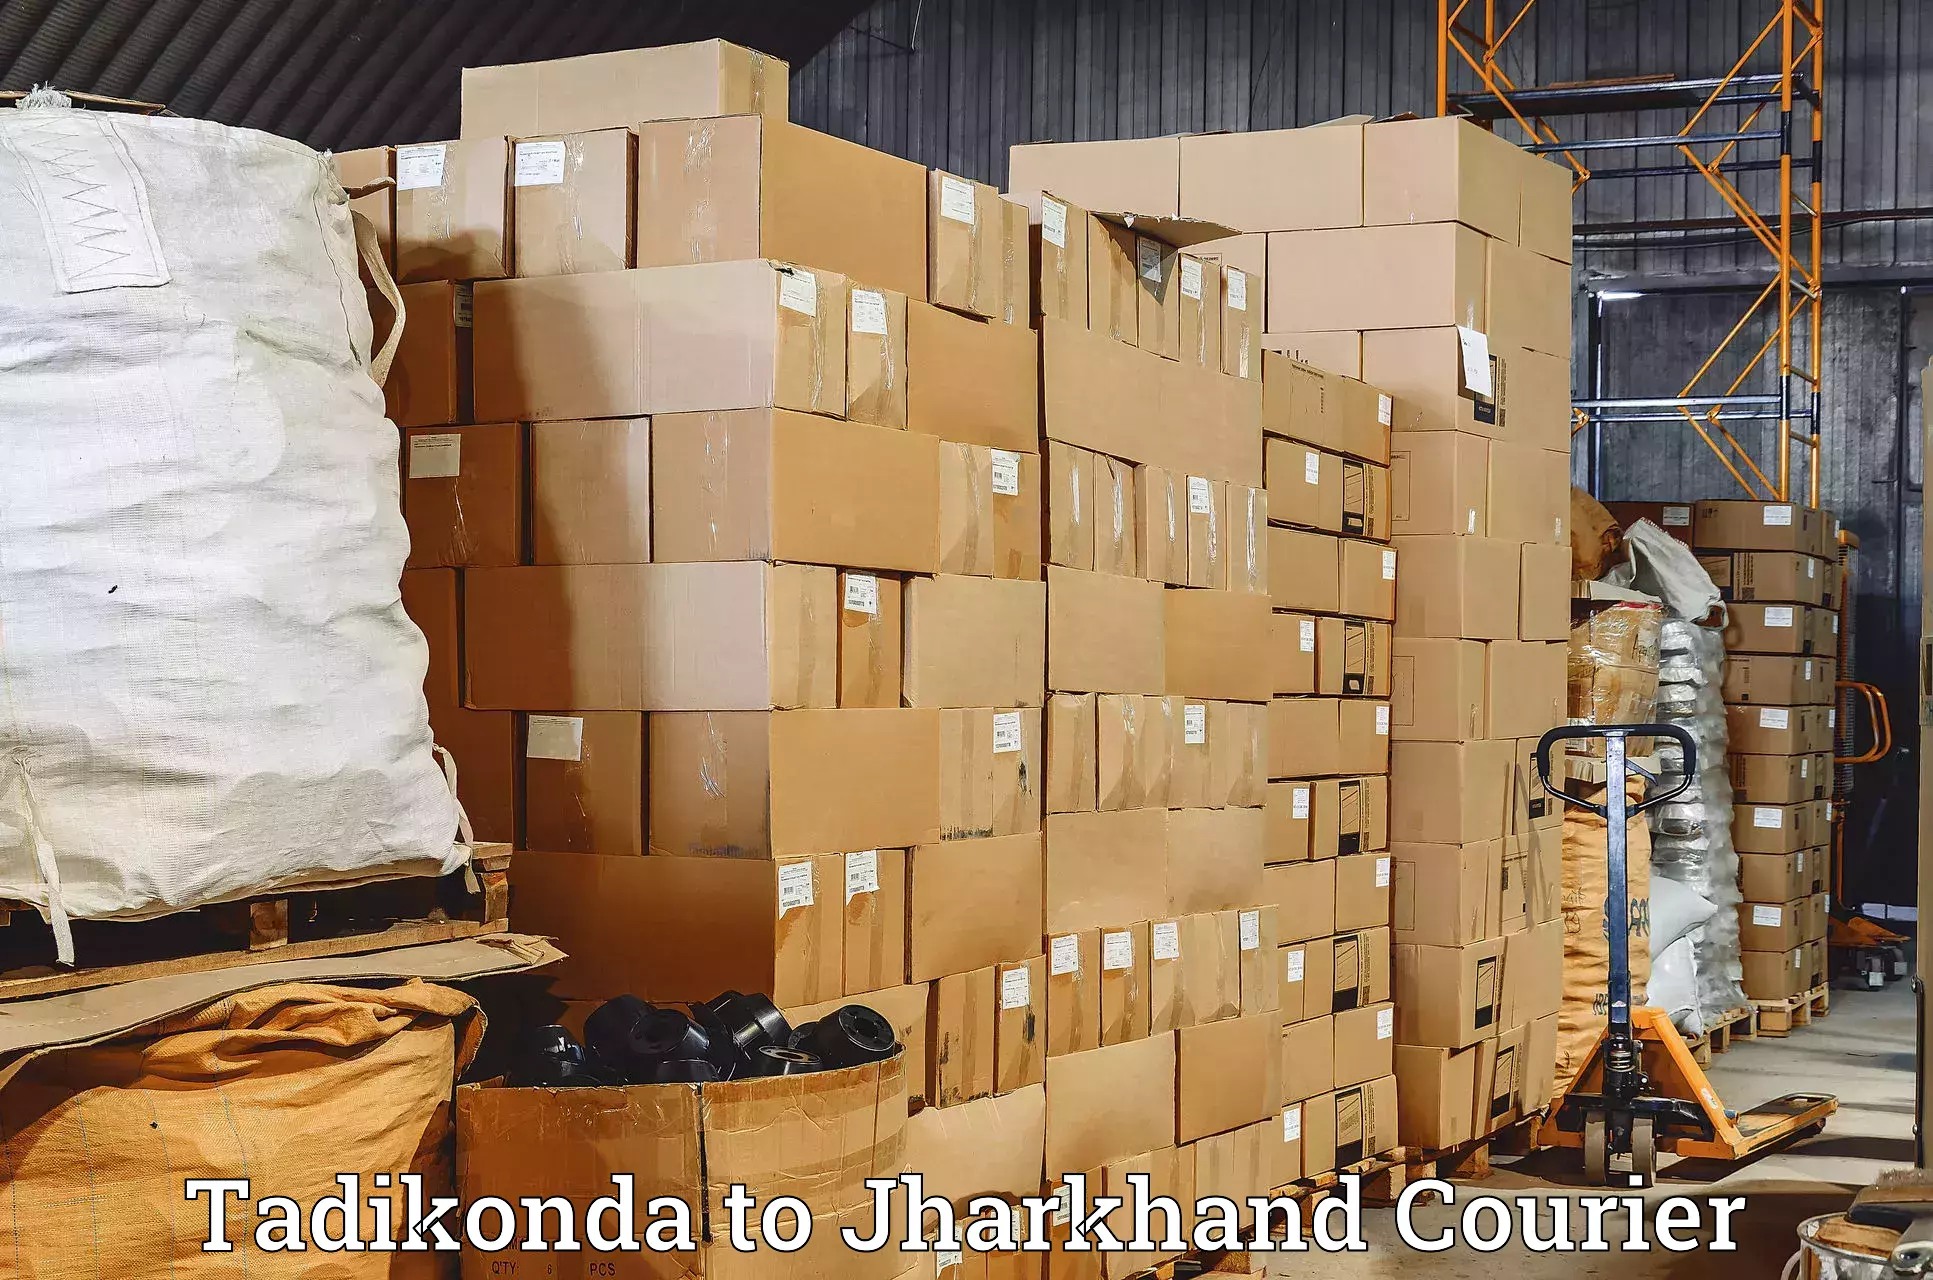 Advanced tracking systems in Tadikonda to Jharkhand